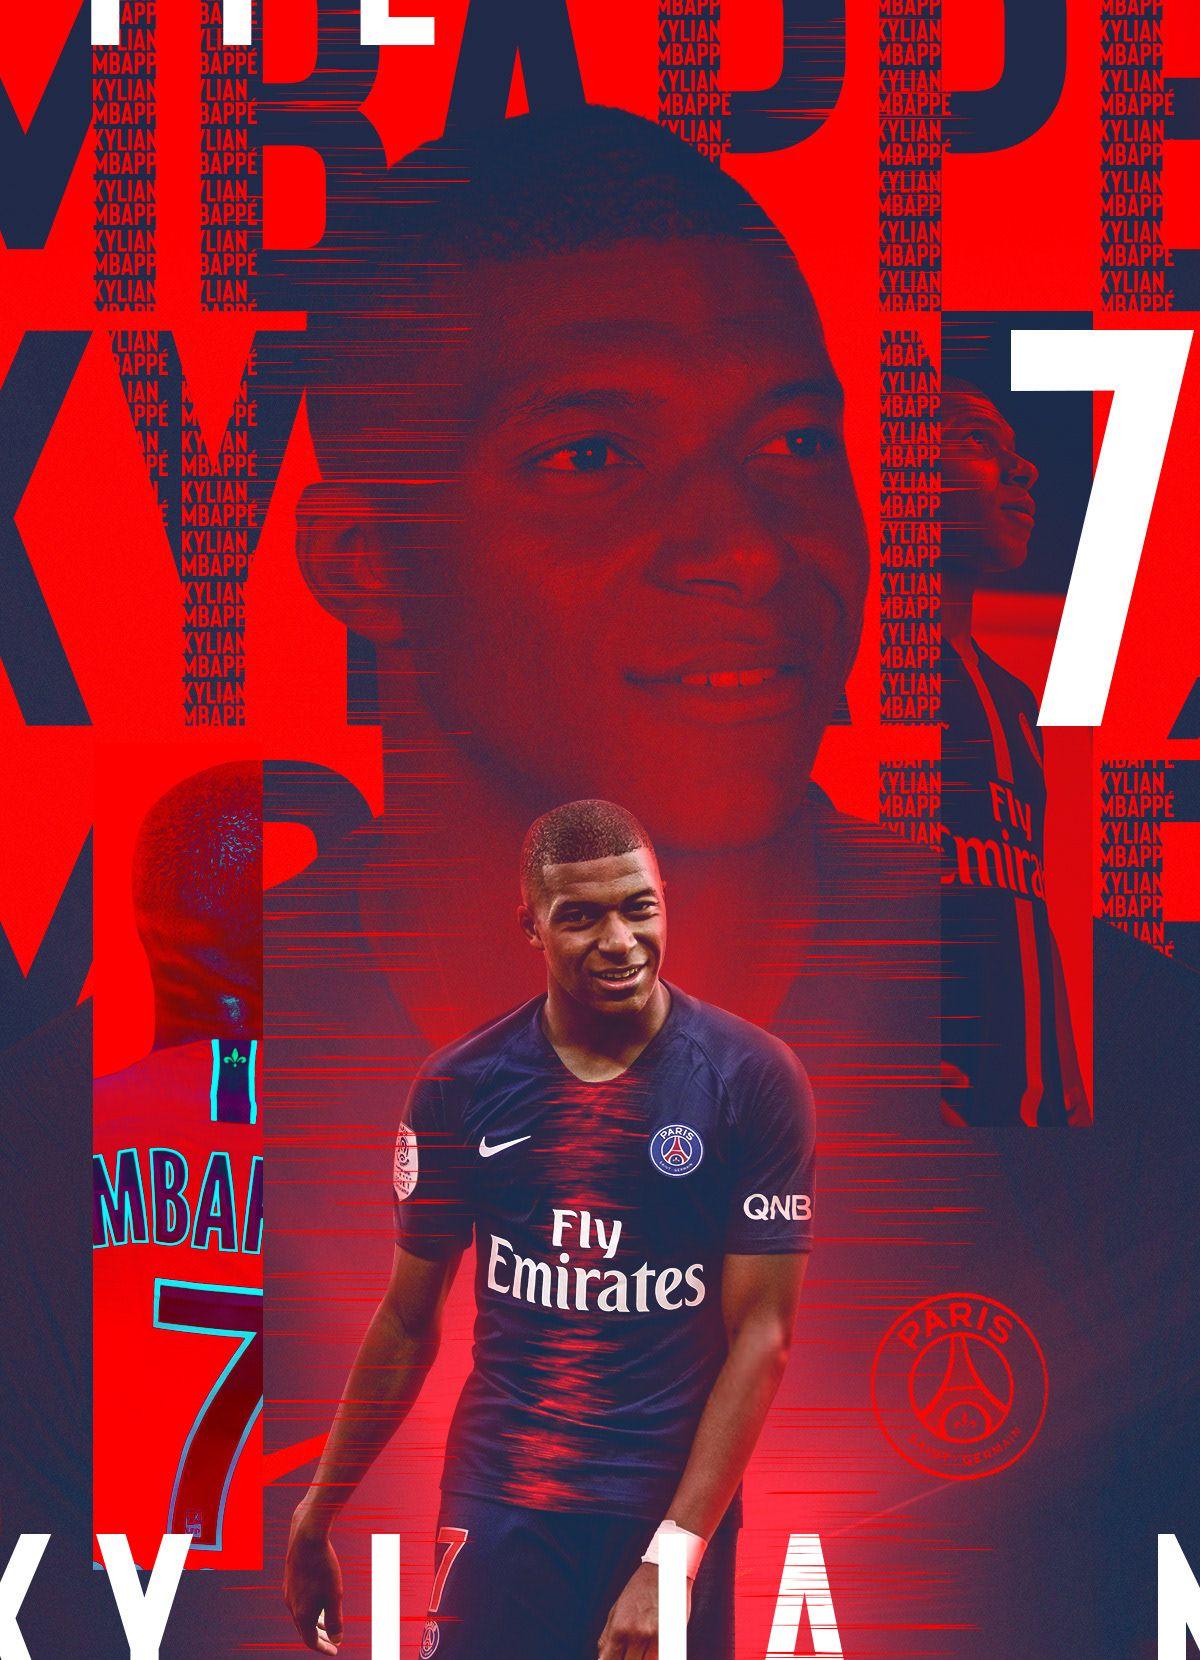 football #nike #kylianmbappe #psg #wallpaper #mercurial #france #오웬 샌디. Psg, Soccer poster, Sports graphic design